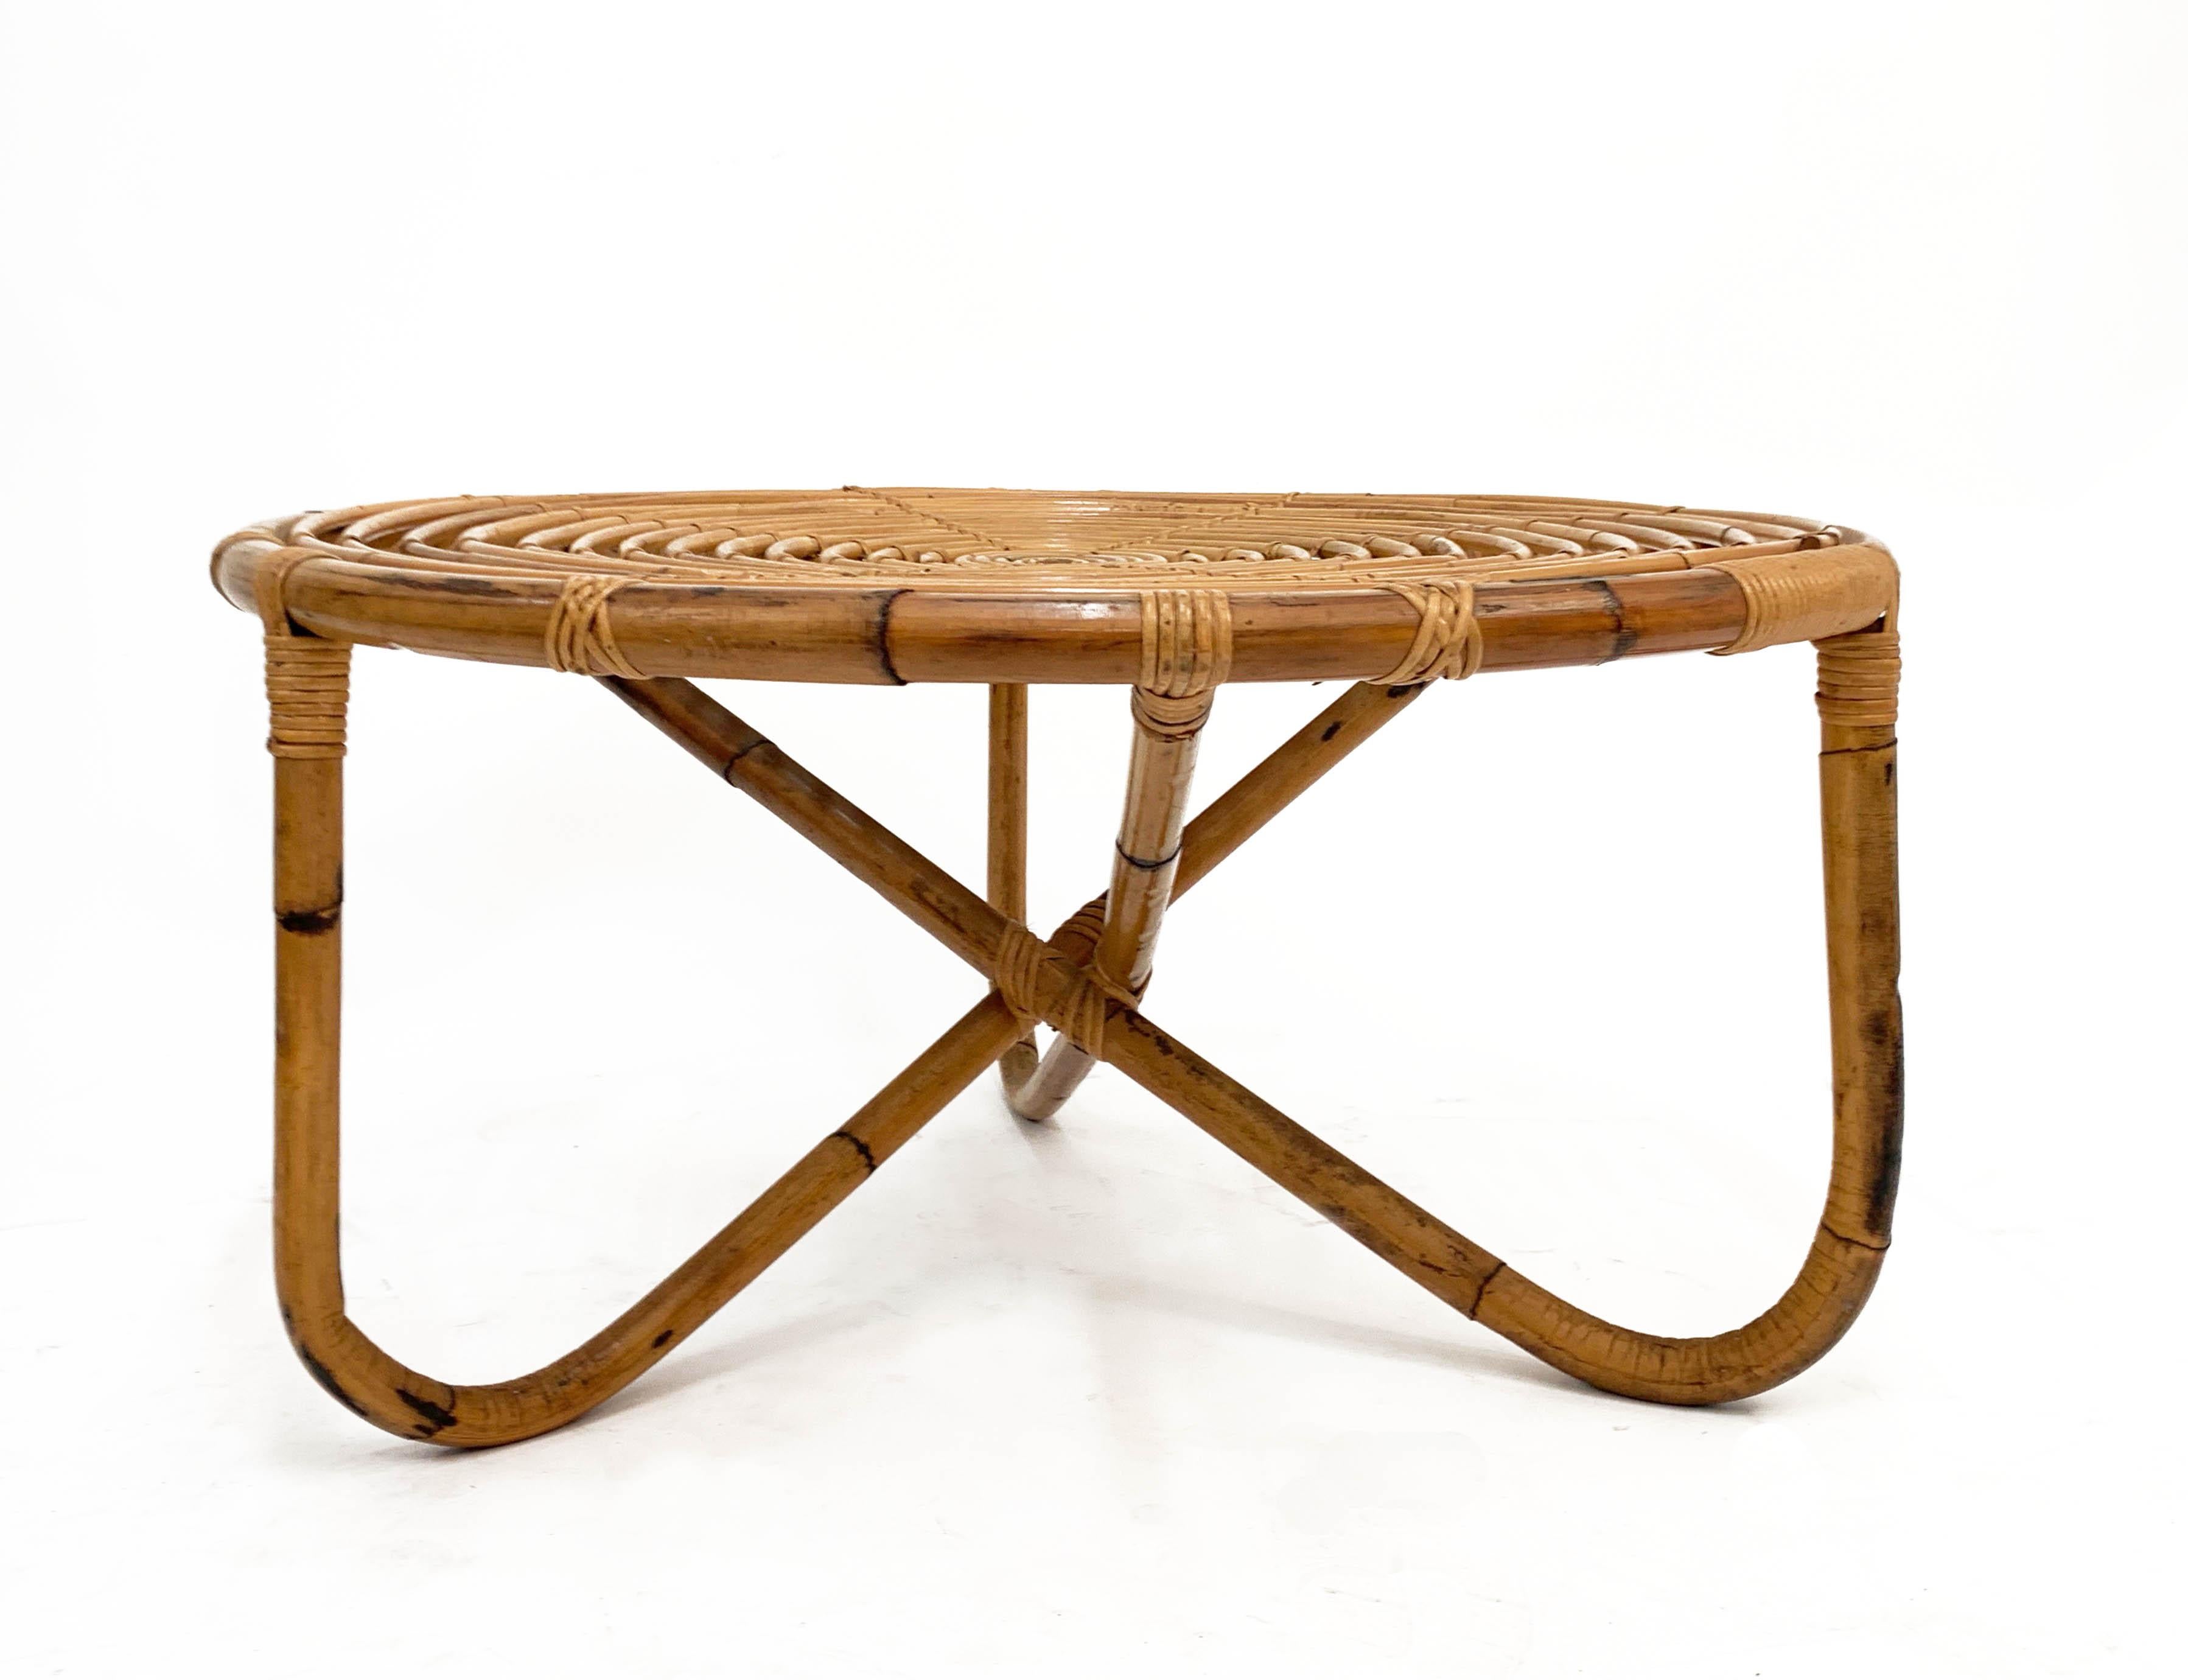 Amazing midcentury round rattan coffee table.

This wonderful piece, named 